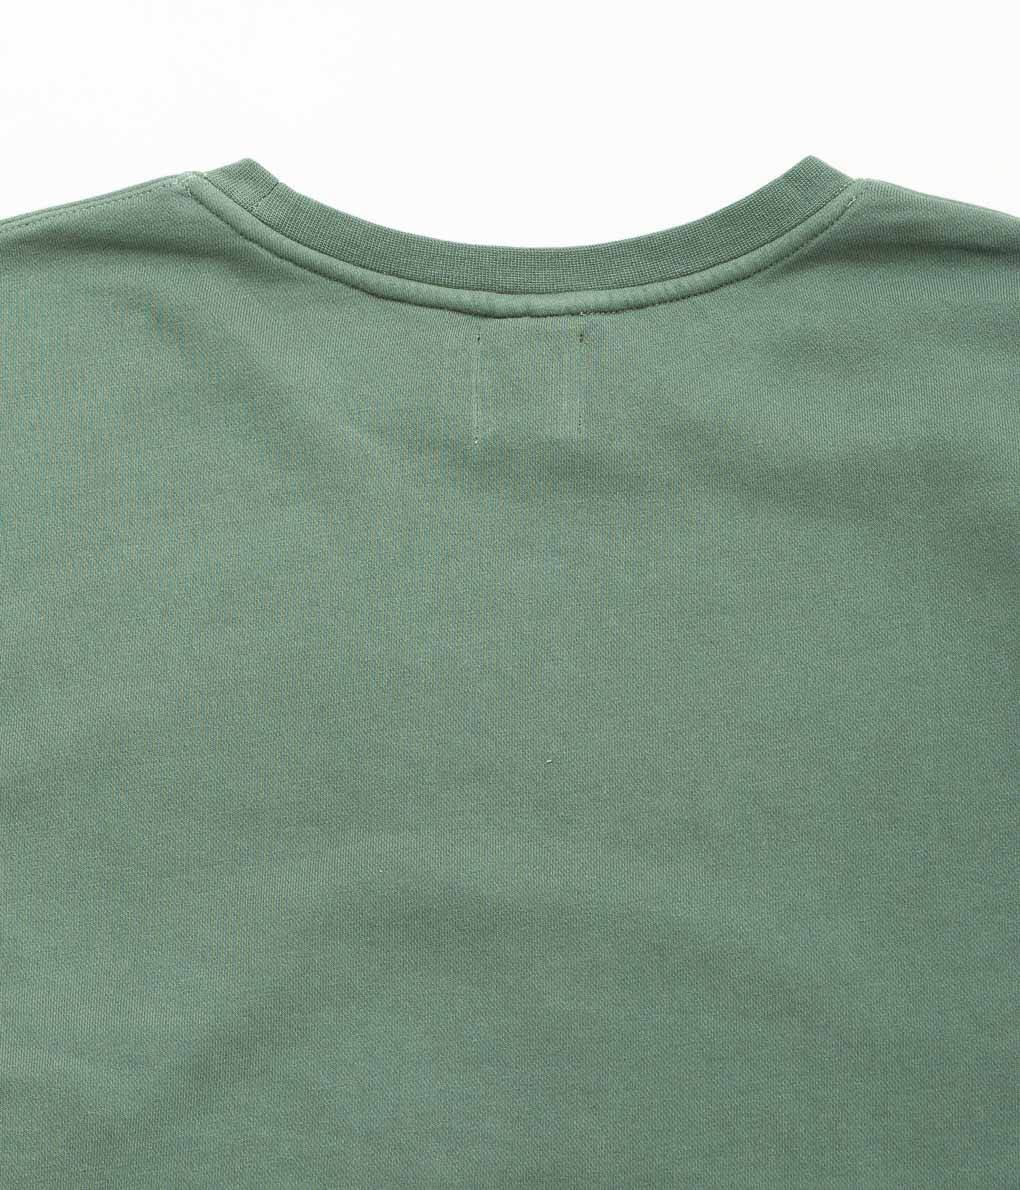 OLD SOLDIER "OUTBOARD FITTINGS SWEAT"(VINTAGE GREEN)